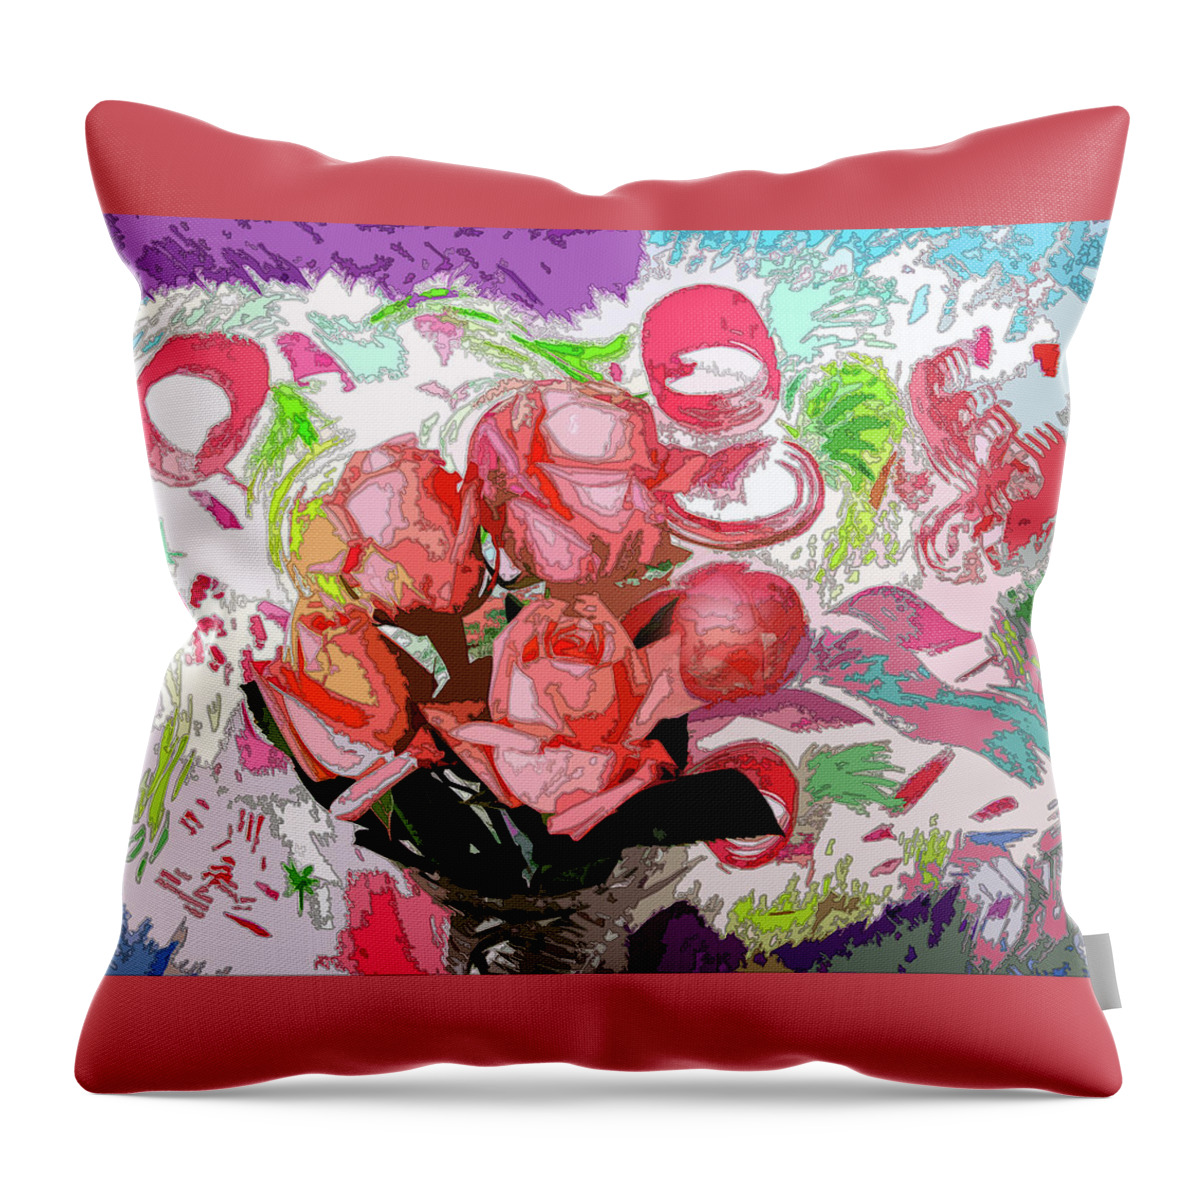 Flower Throw Pillow featuring the photograph Mod Floral Bouquet by Corinne Carroll